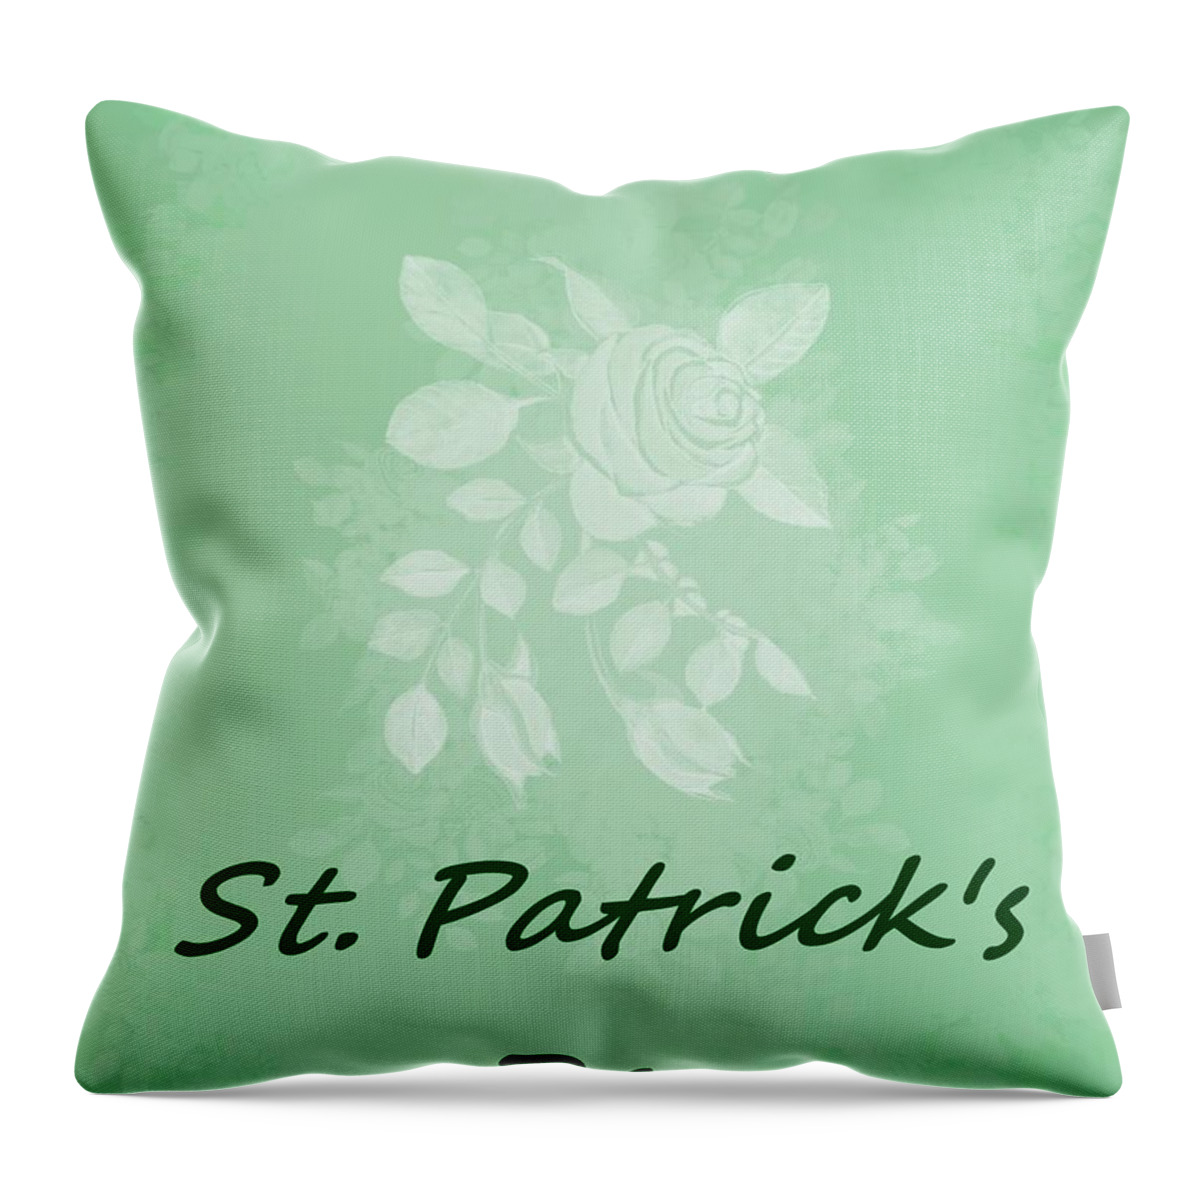 St. Patrick's Day Throw Pillow featuring the digital art Happy St. Patrick's Day Holiday Card by Delynn Addams